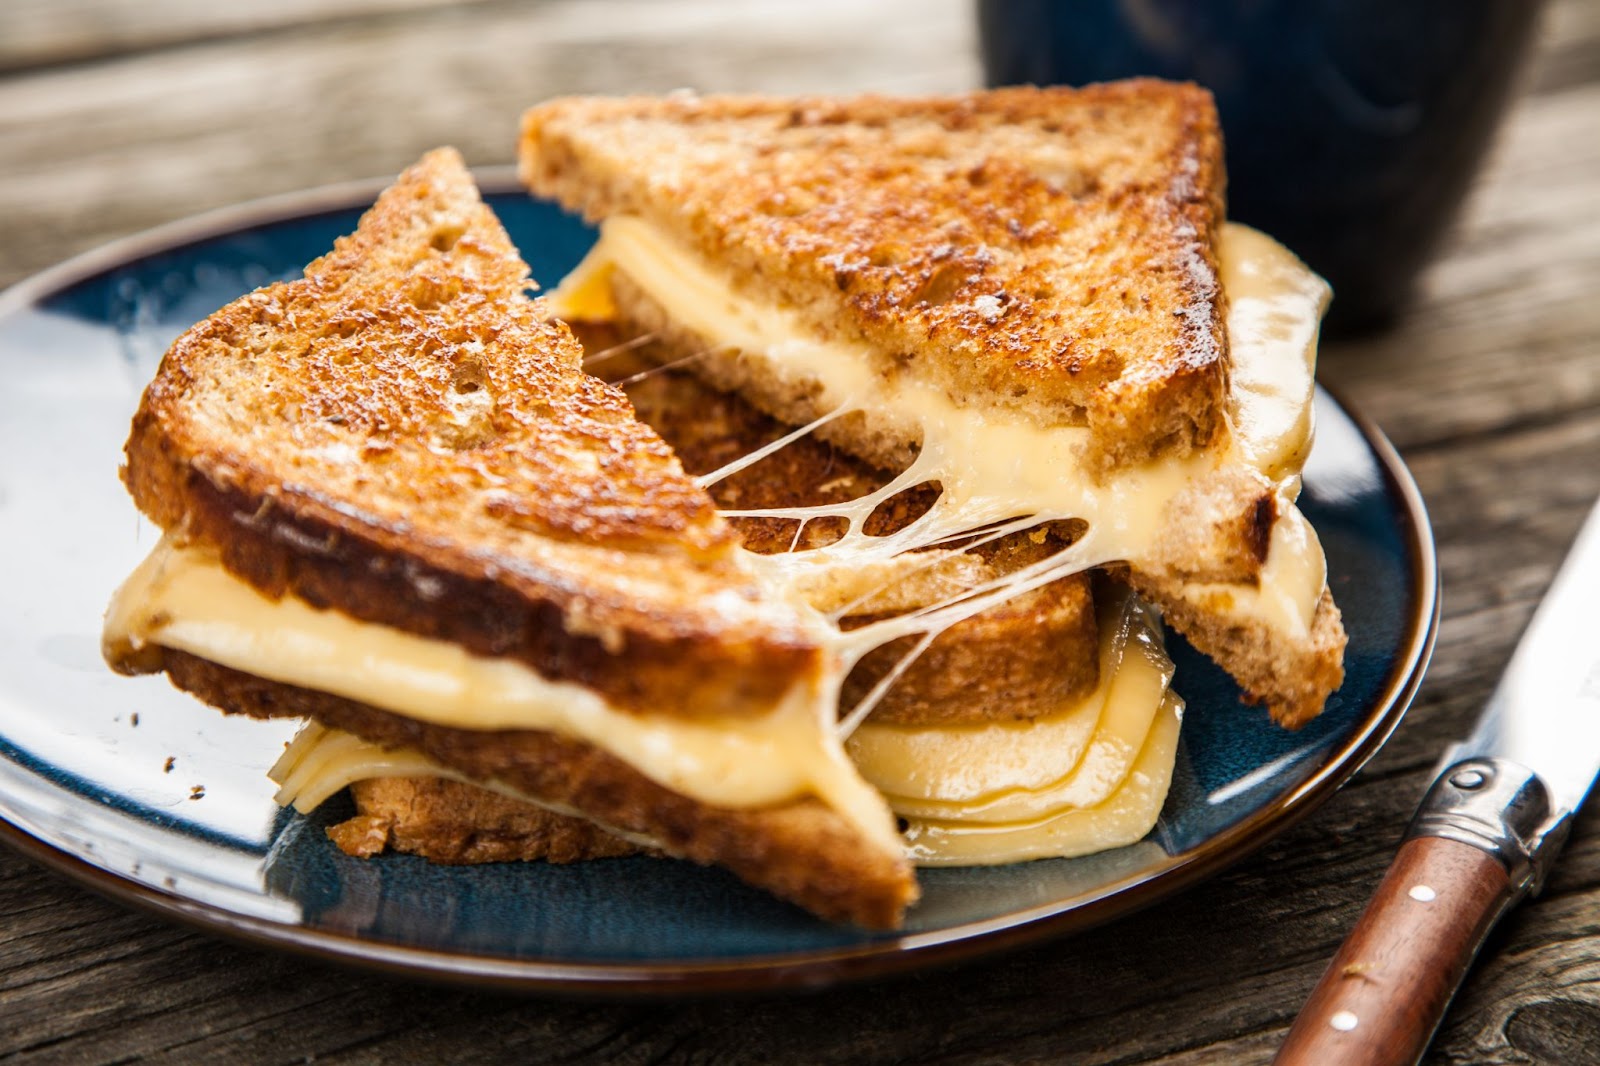 How to Make the Ultimate Toastie with Your Toastie Maker